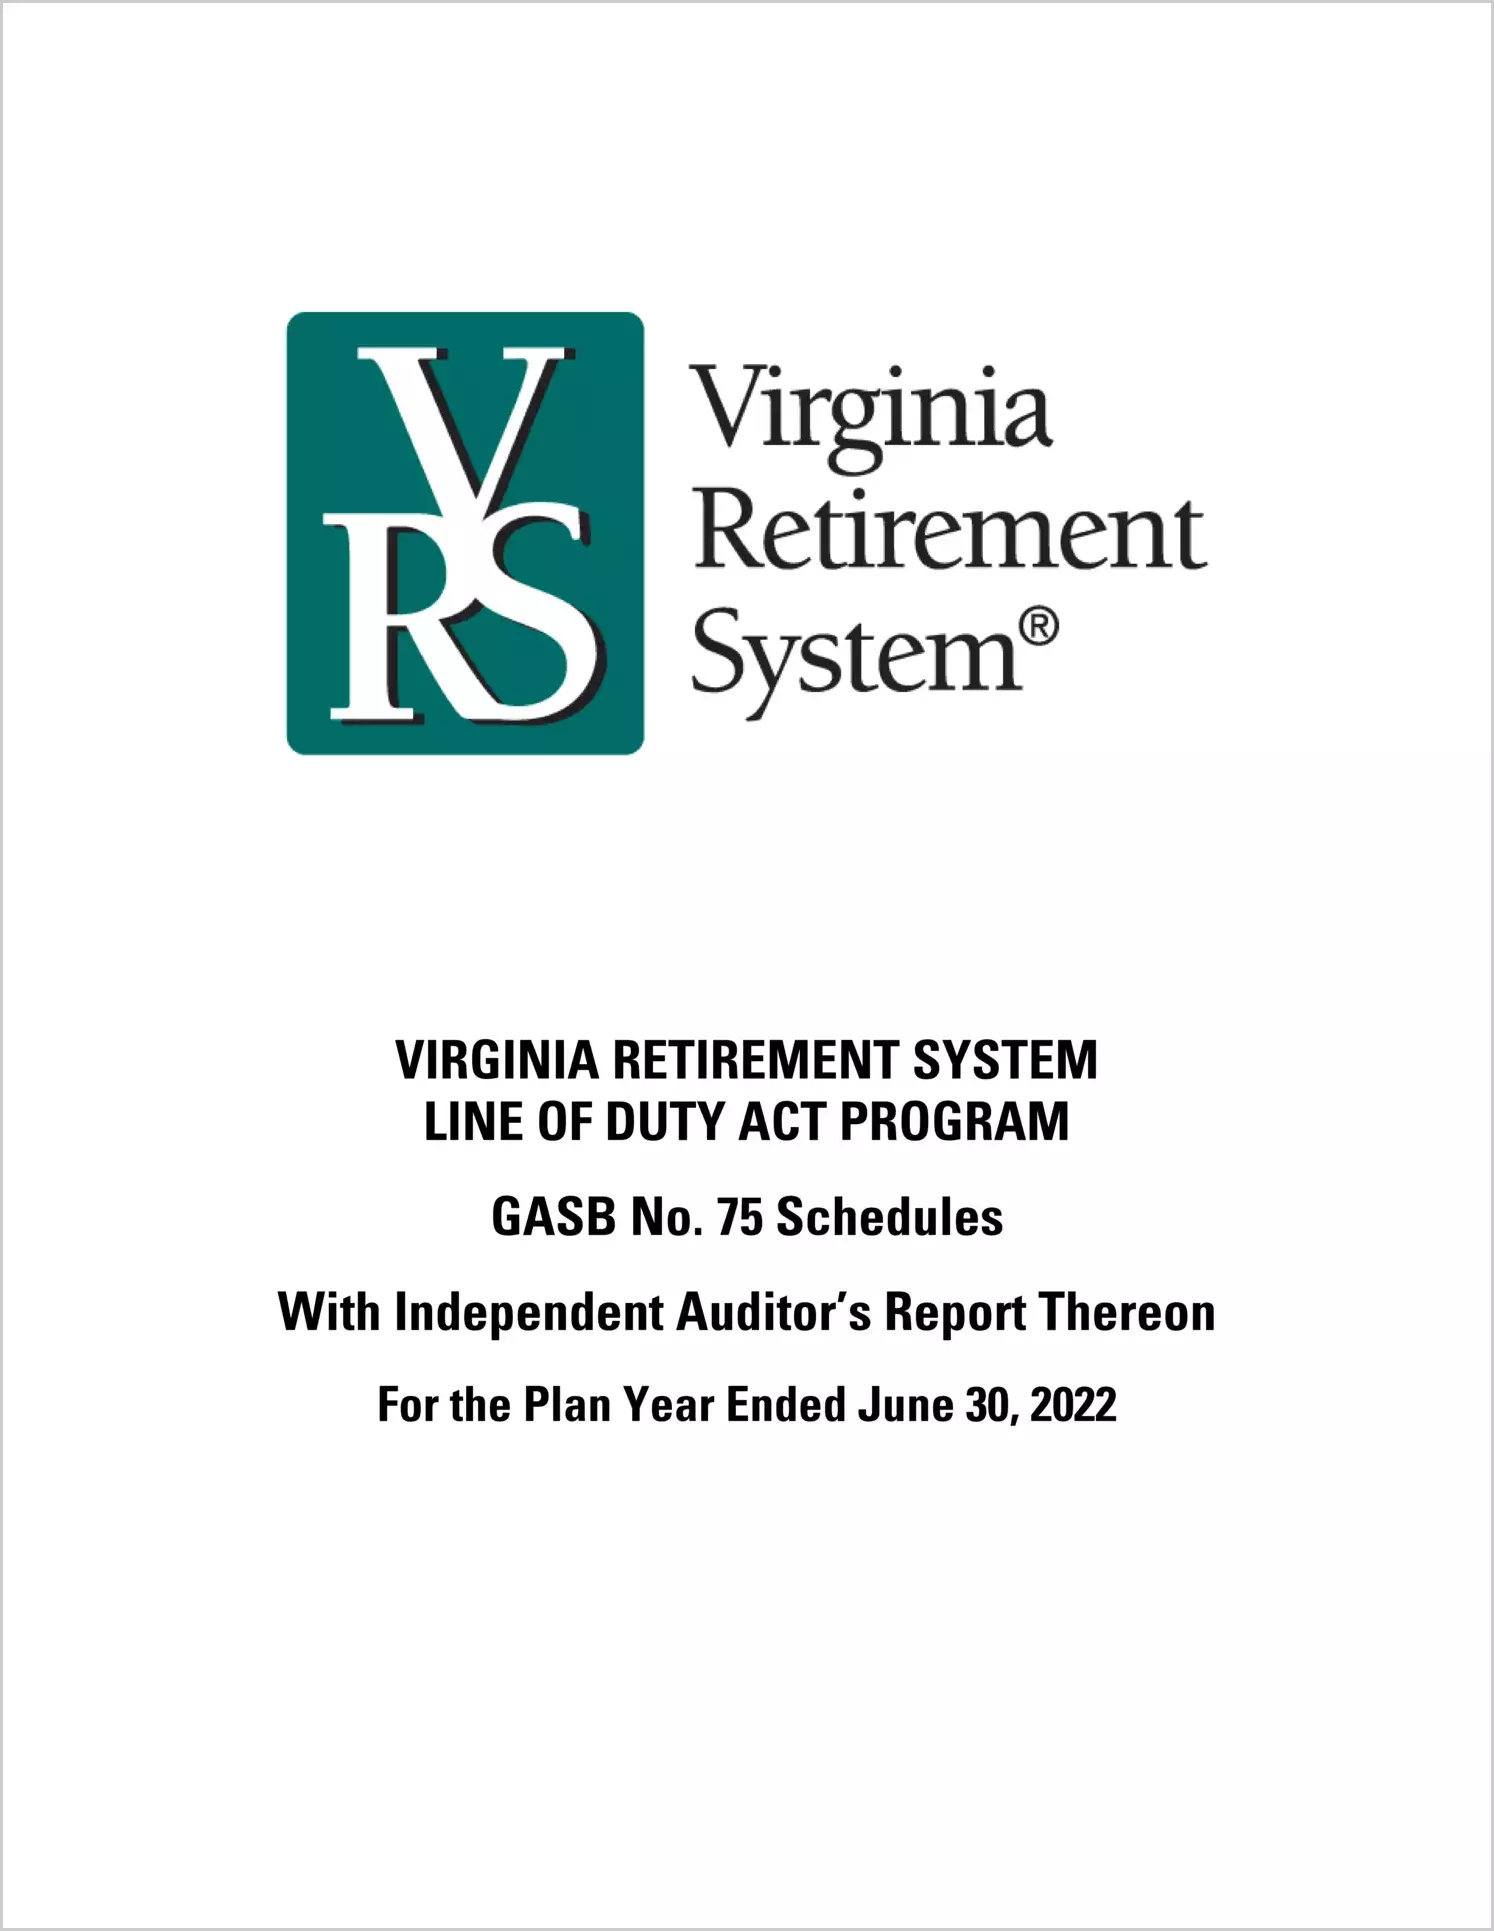 GASB 75 Virginia Retirement System Line of Duty Act Program for the year ended June 30, 2022